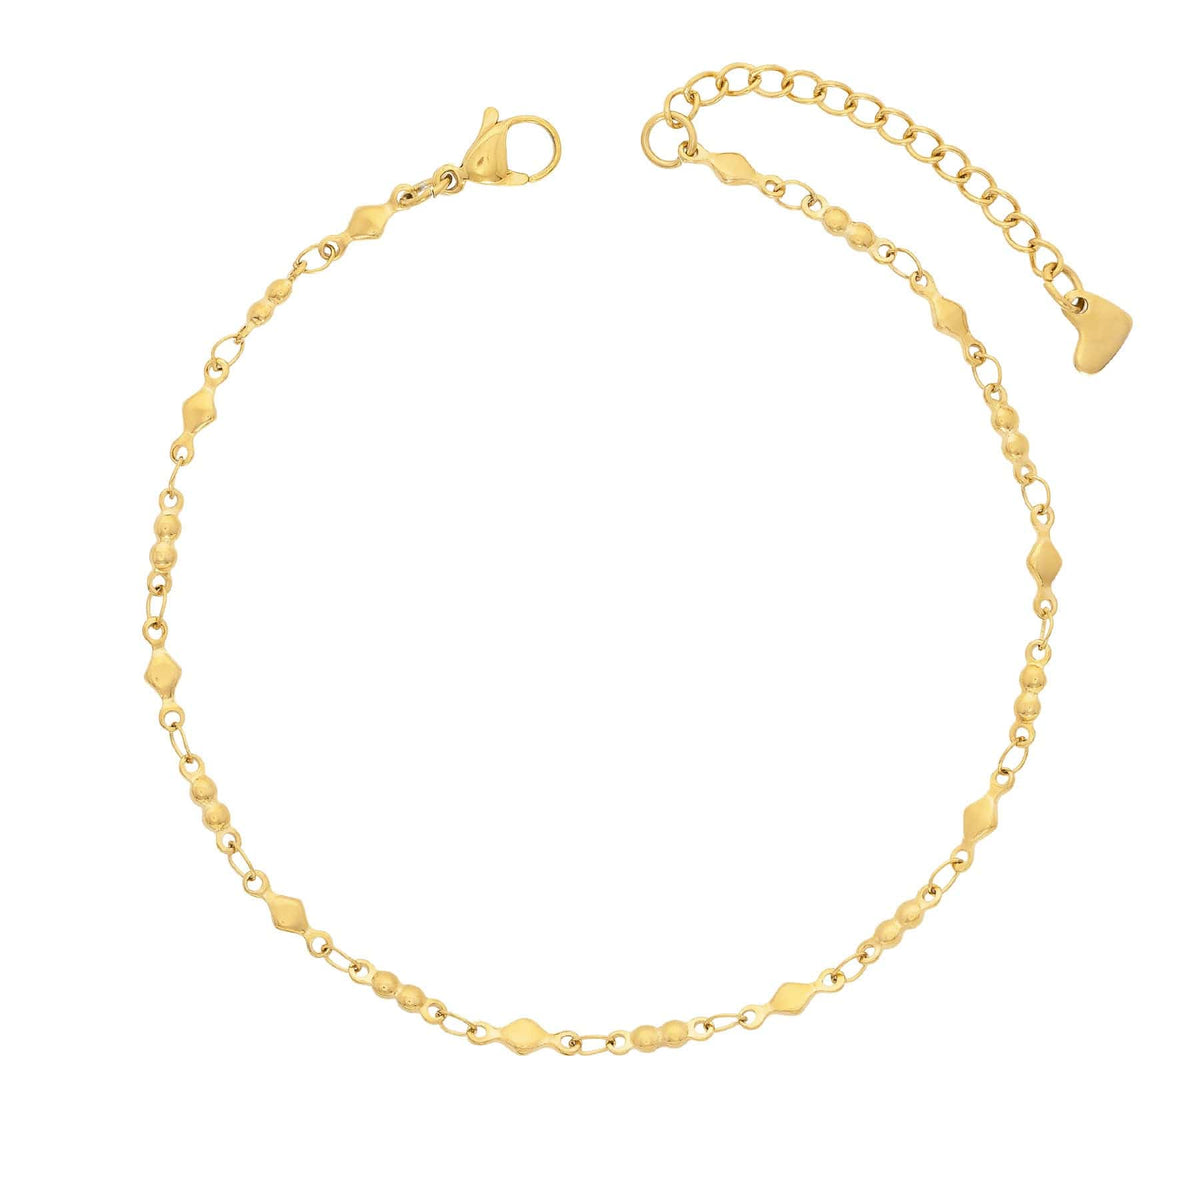 BohoMoon Stainless Steel Rory Anklet Gold